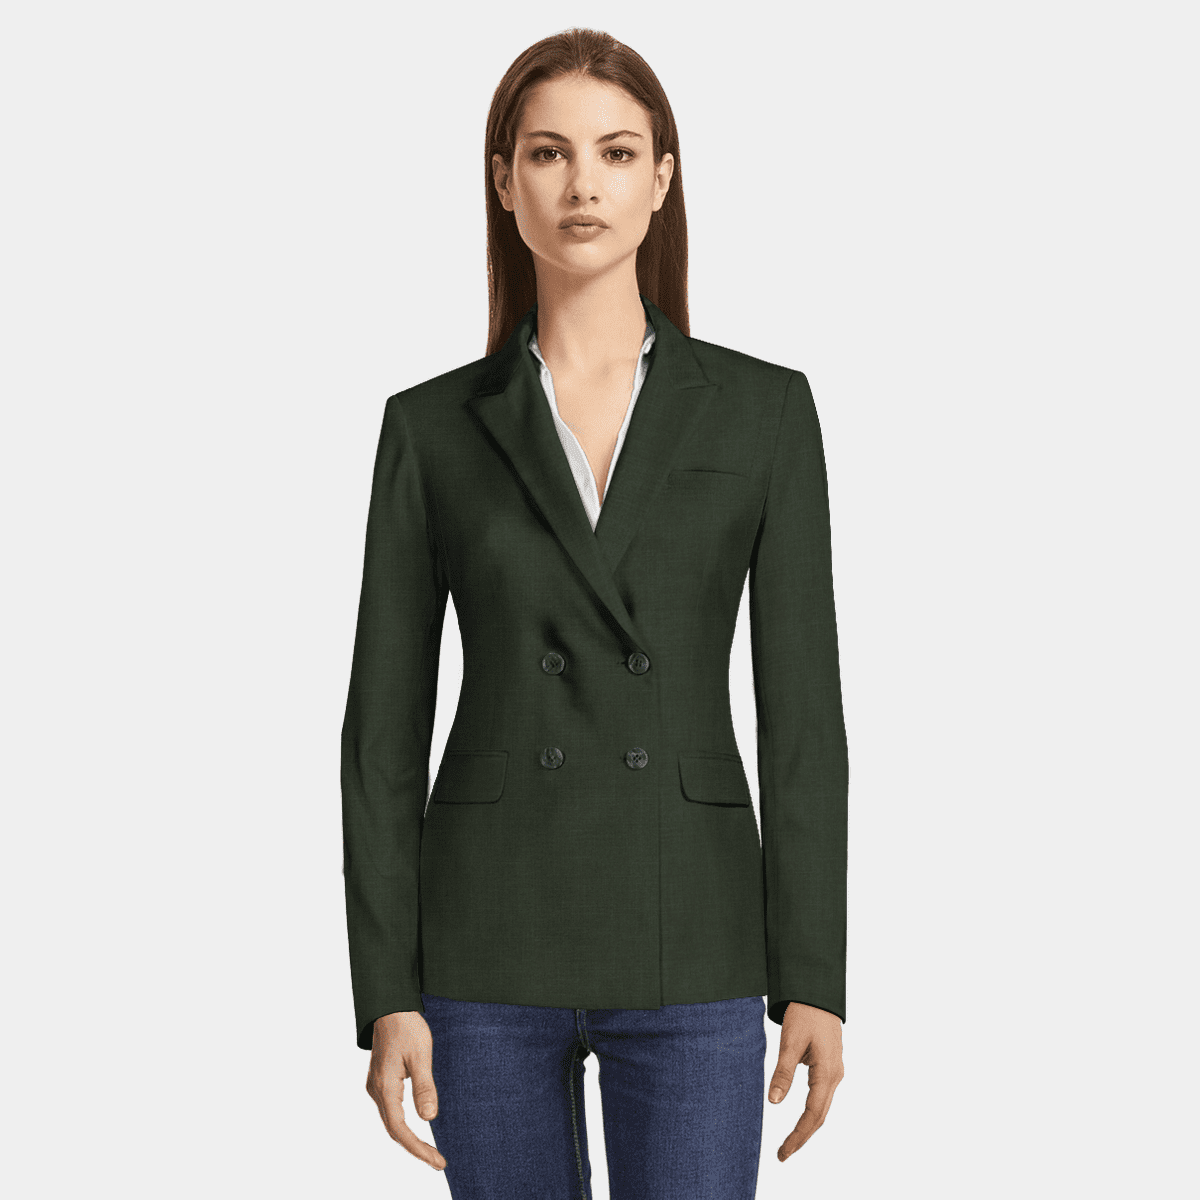 Olive Green Double Button Formal Blazer